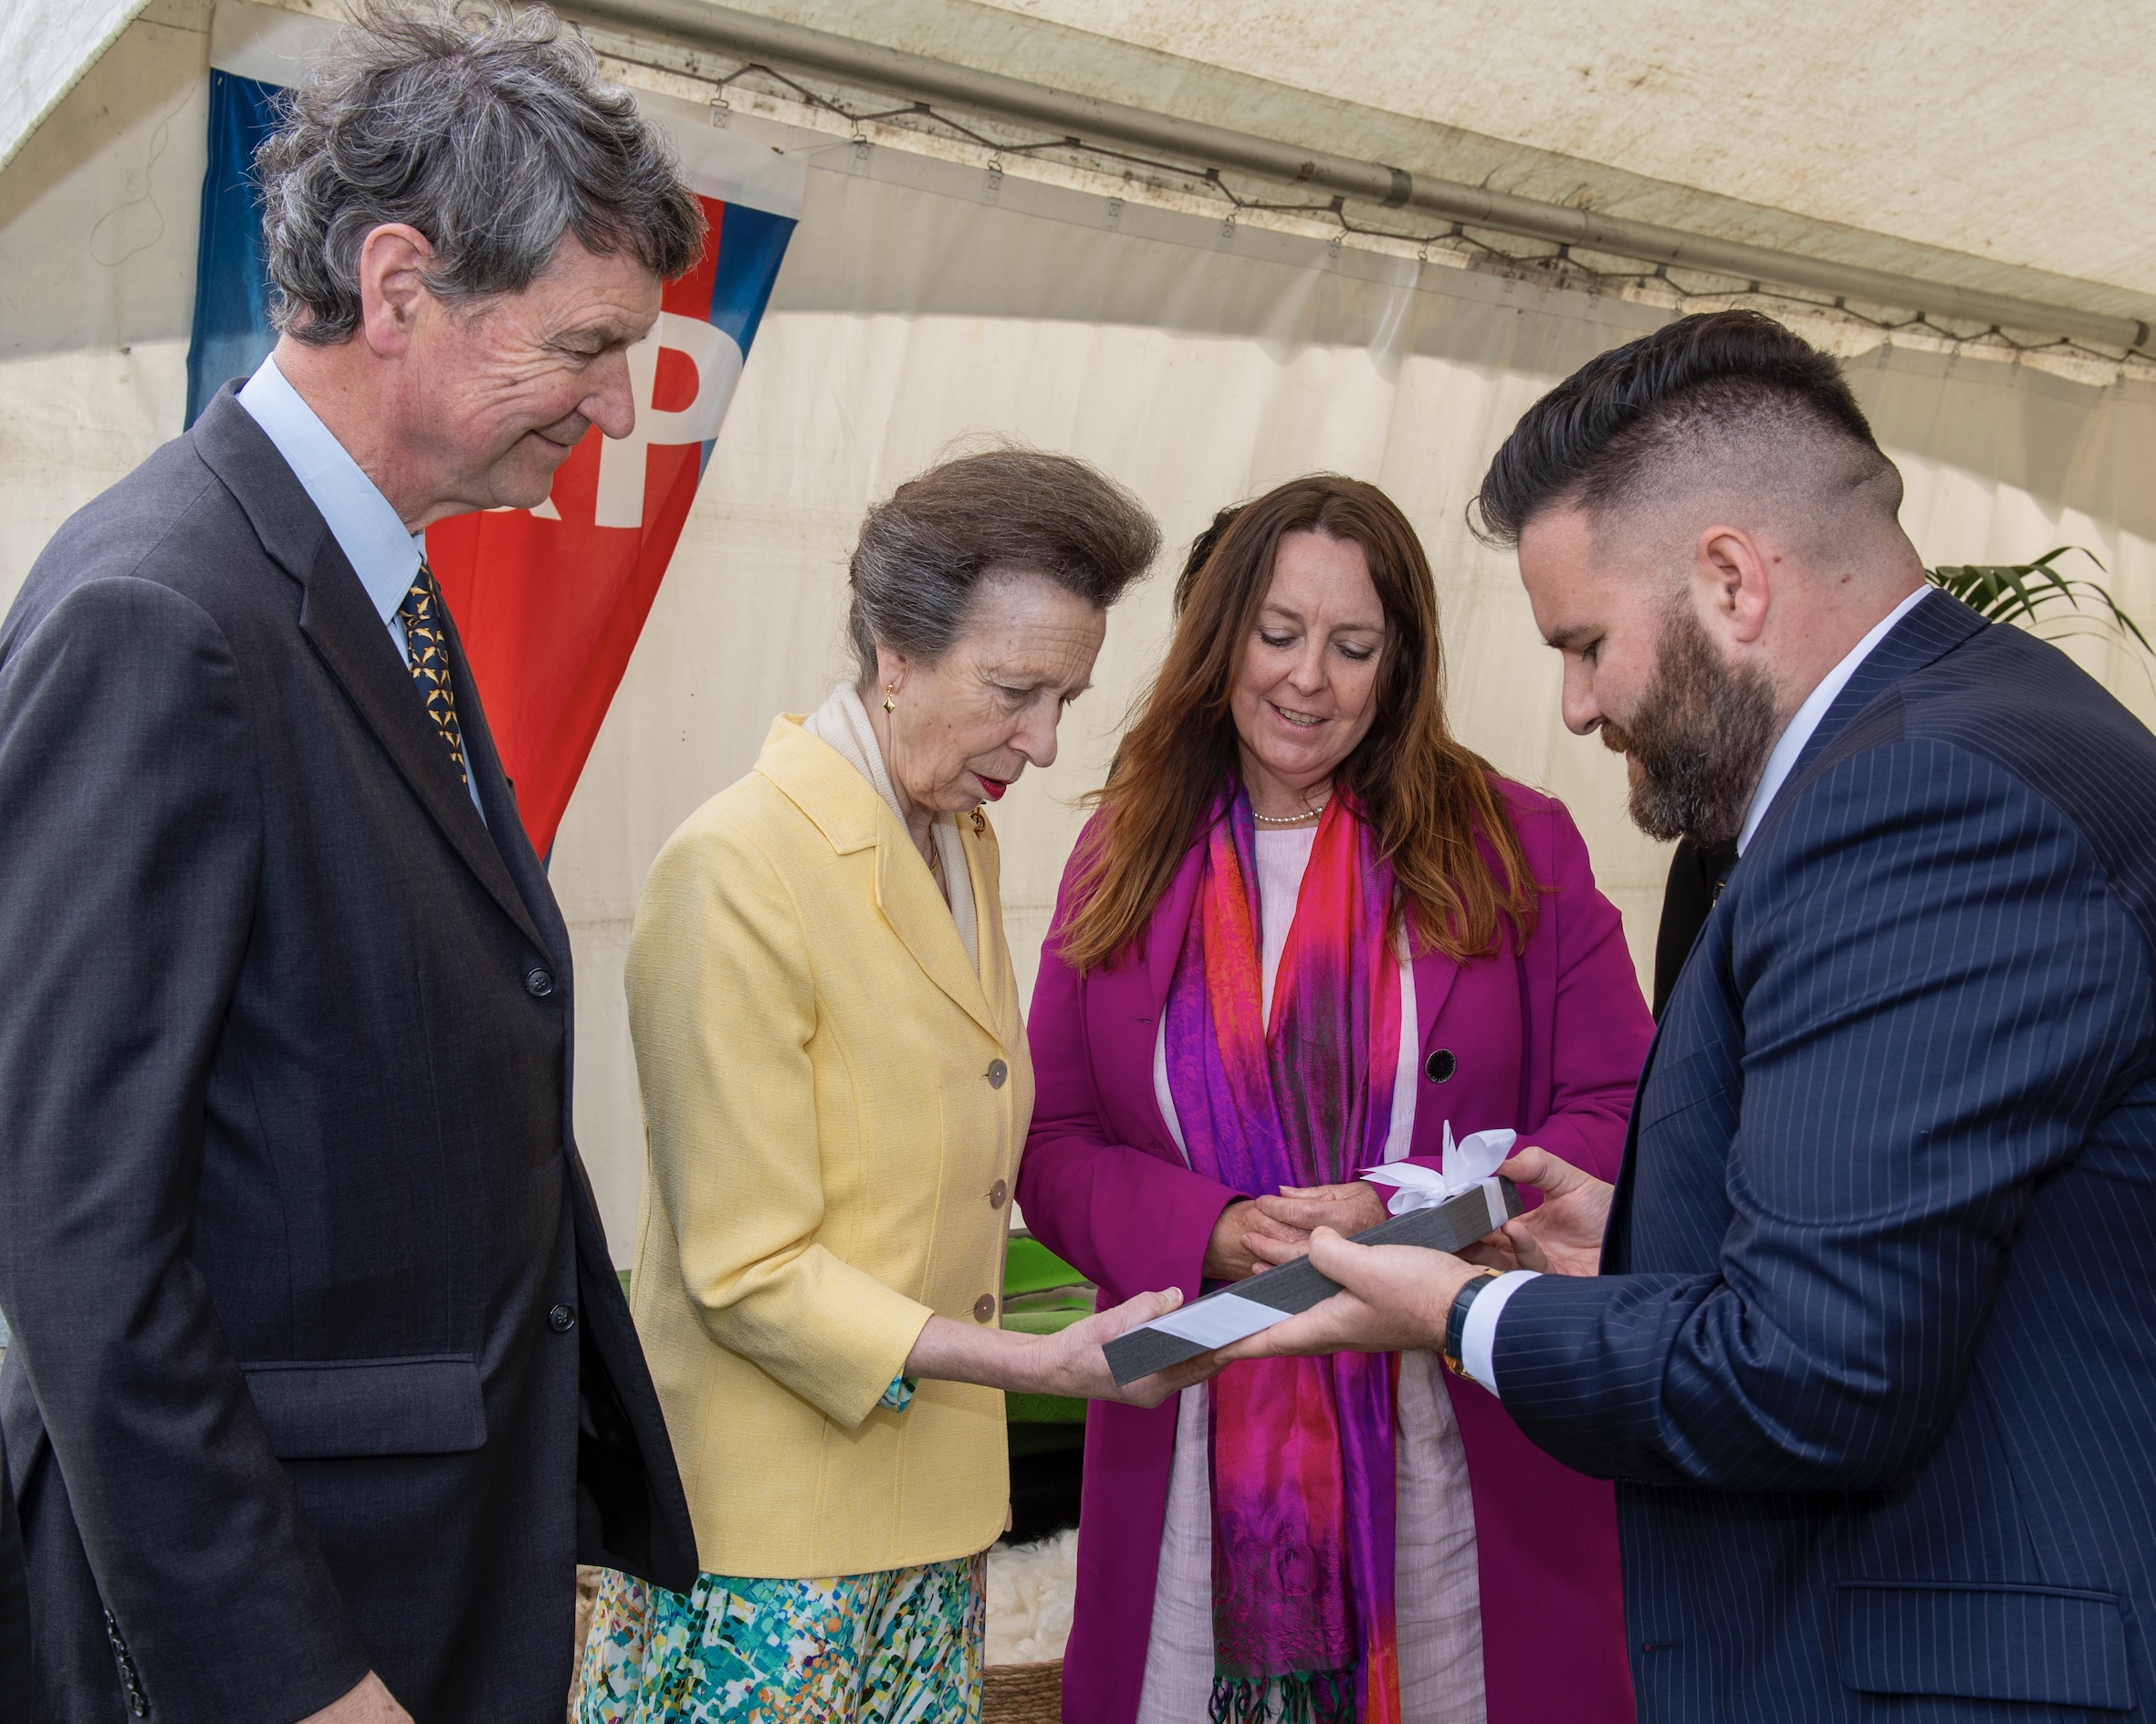 Visit from Her Royal Highness, The Princess Royal and Vice Admiral Sir Tim Lawrence